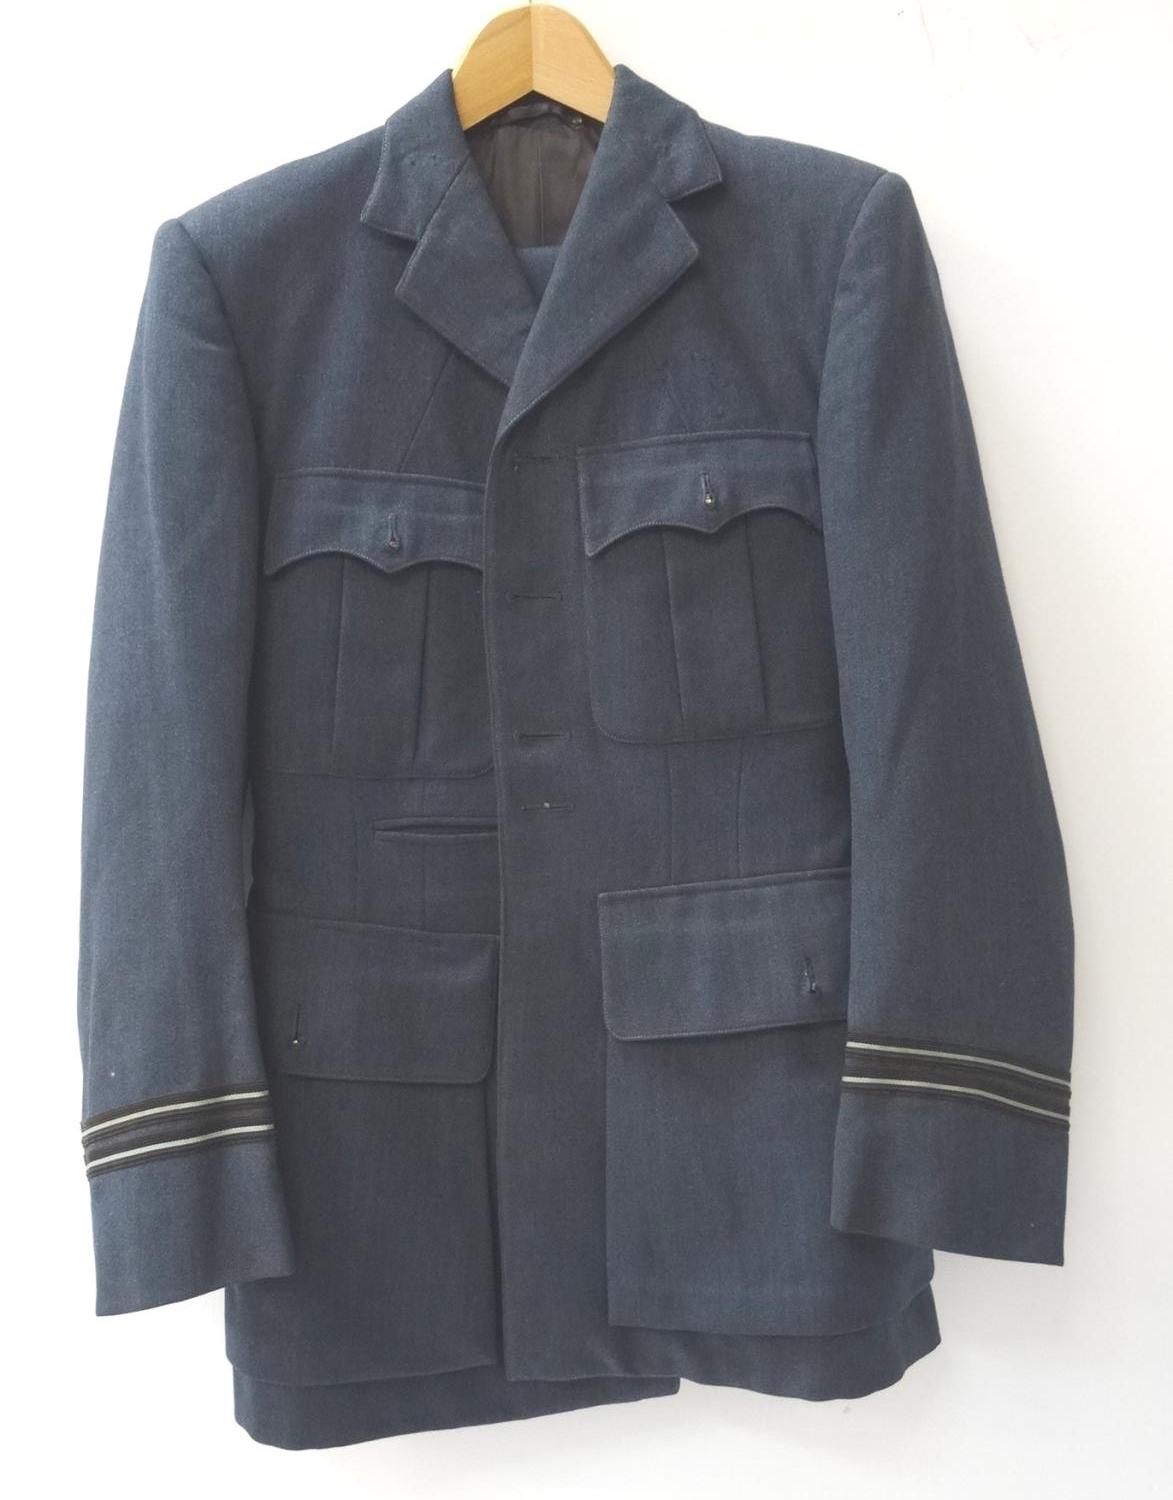 RAF SERGEANTS JACKET with stripes to both arms and a pair of matching trousers